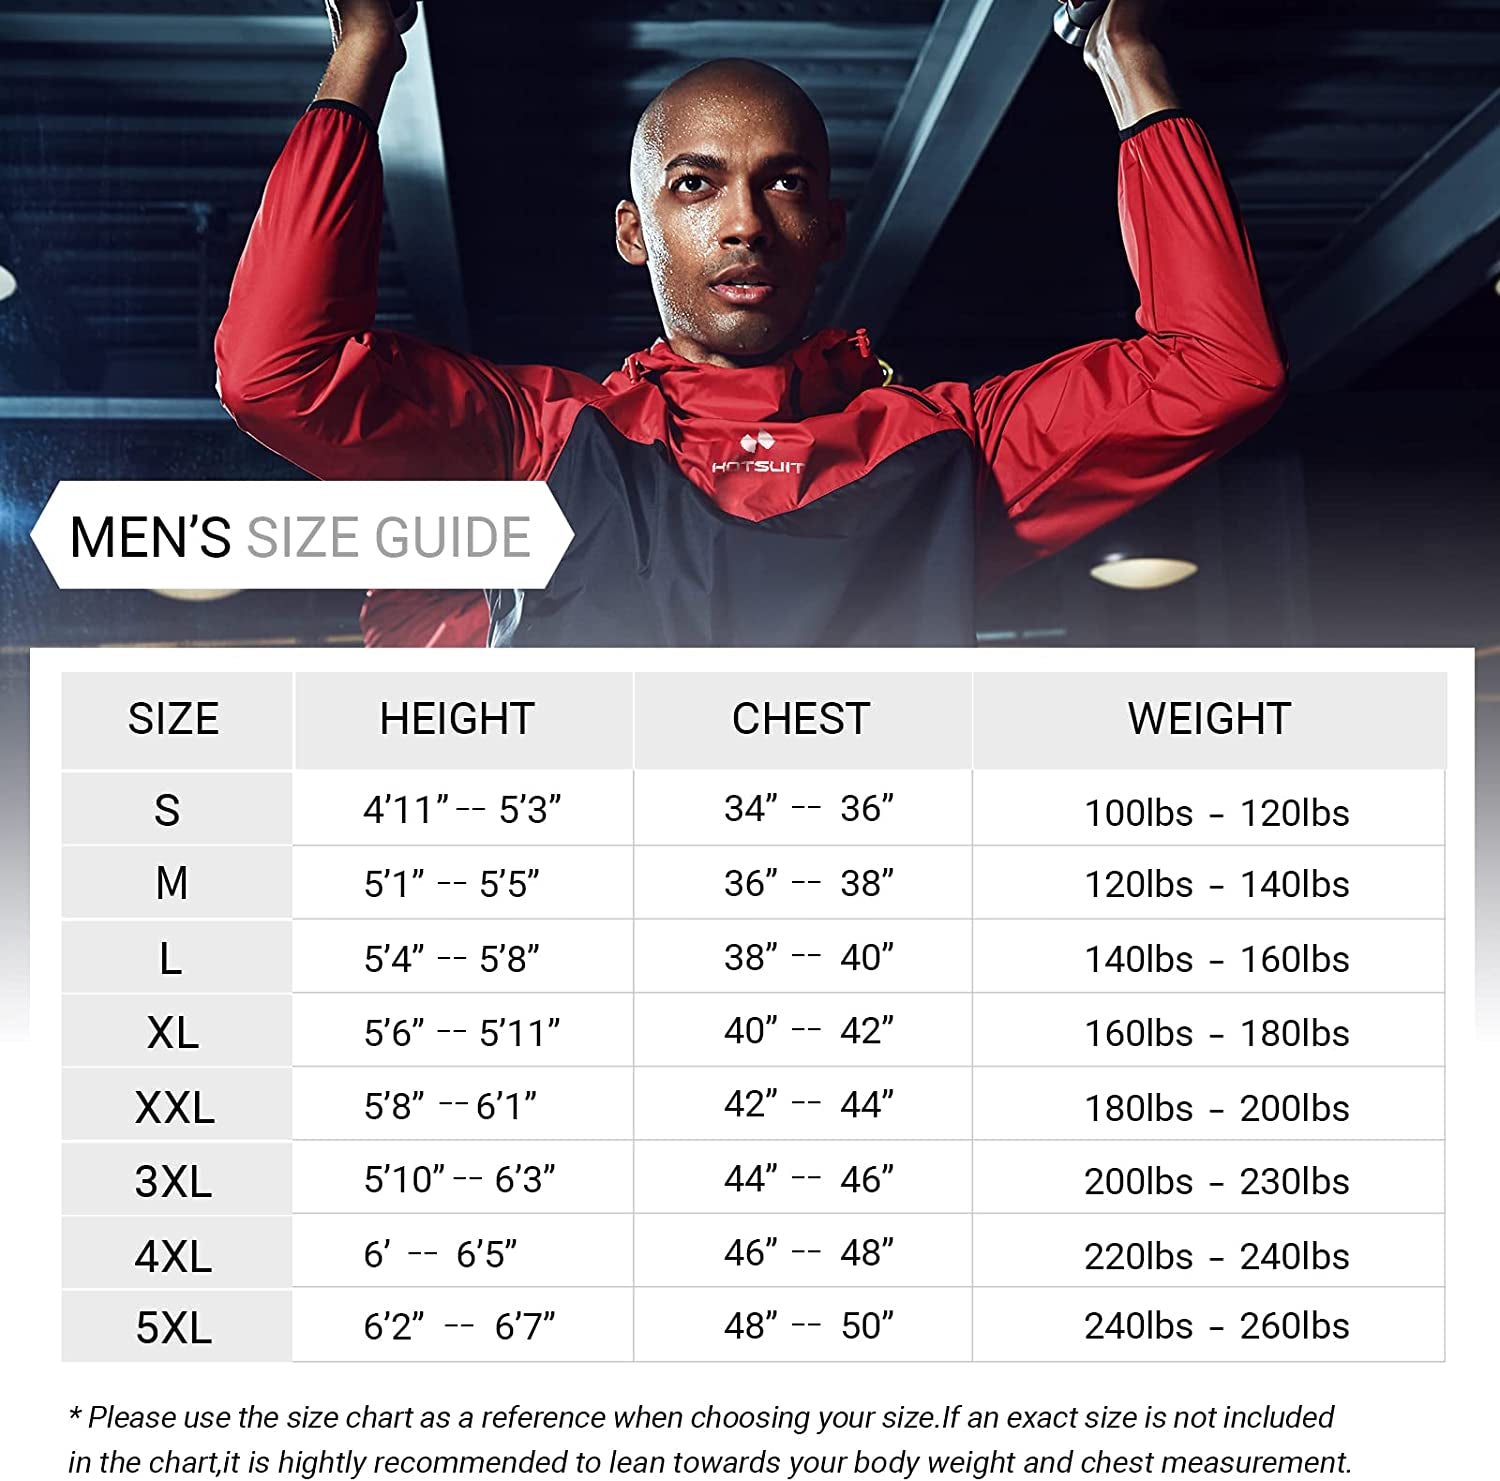 "Enhance Your Gym Performance with the Men's Ultimate Sweat Sauna Suit - Optimize Your Workout and Reach Peak Performance!"